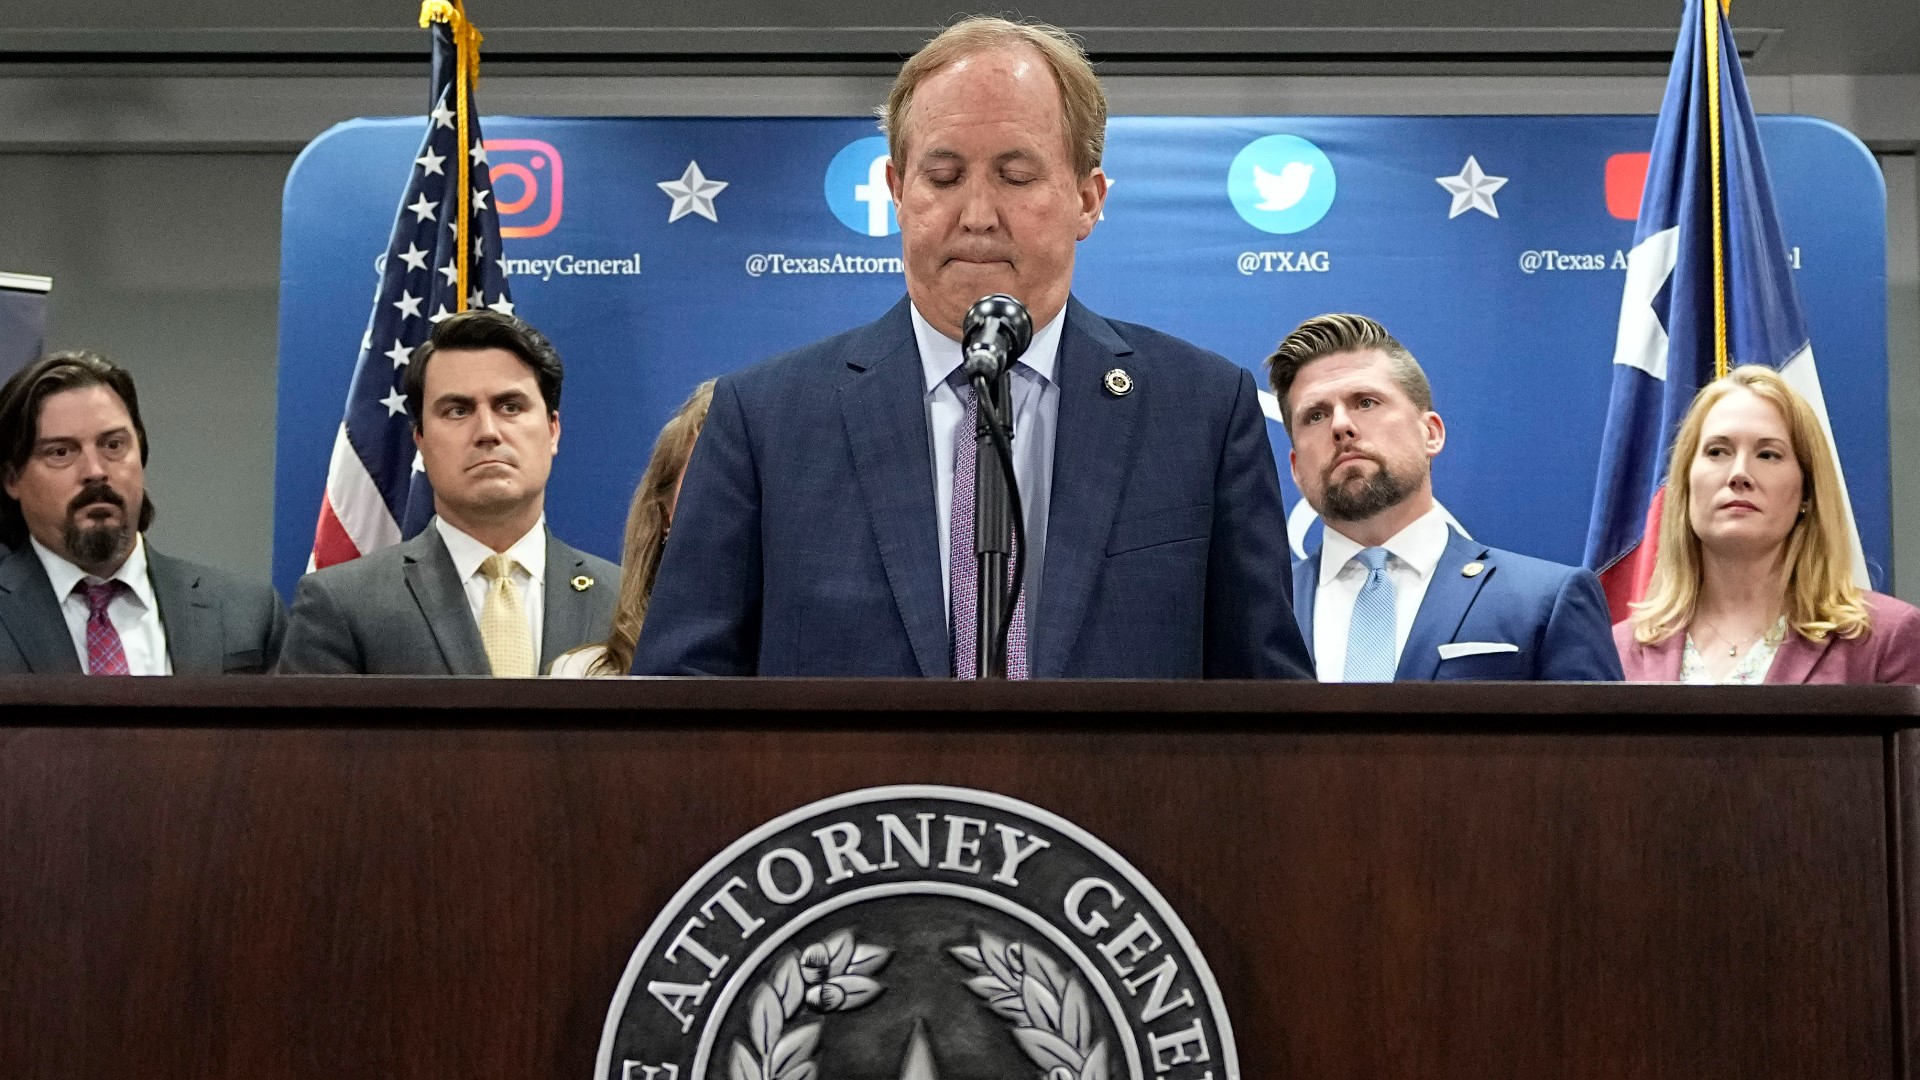 Attorney General Ken Paxton said the impeachment vote is solely happening because of the legal challenges he bringing against President Biden.